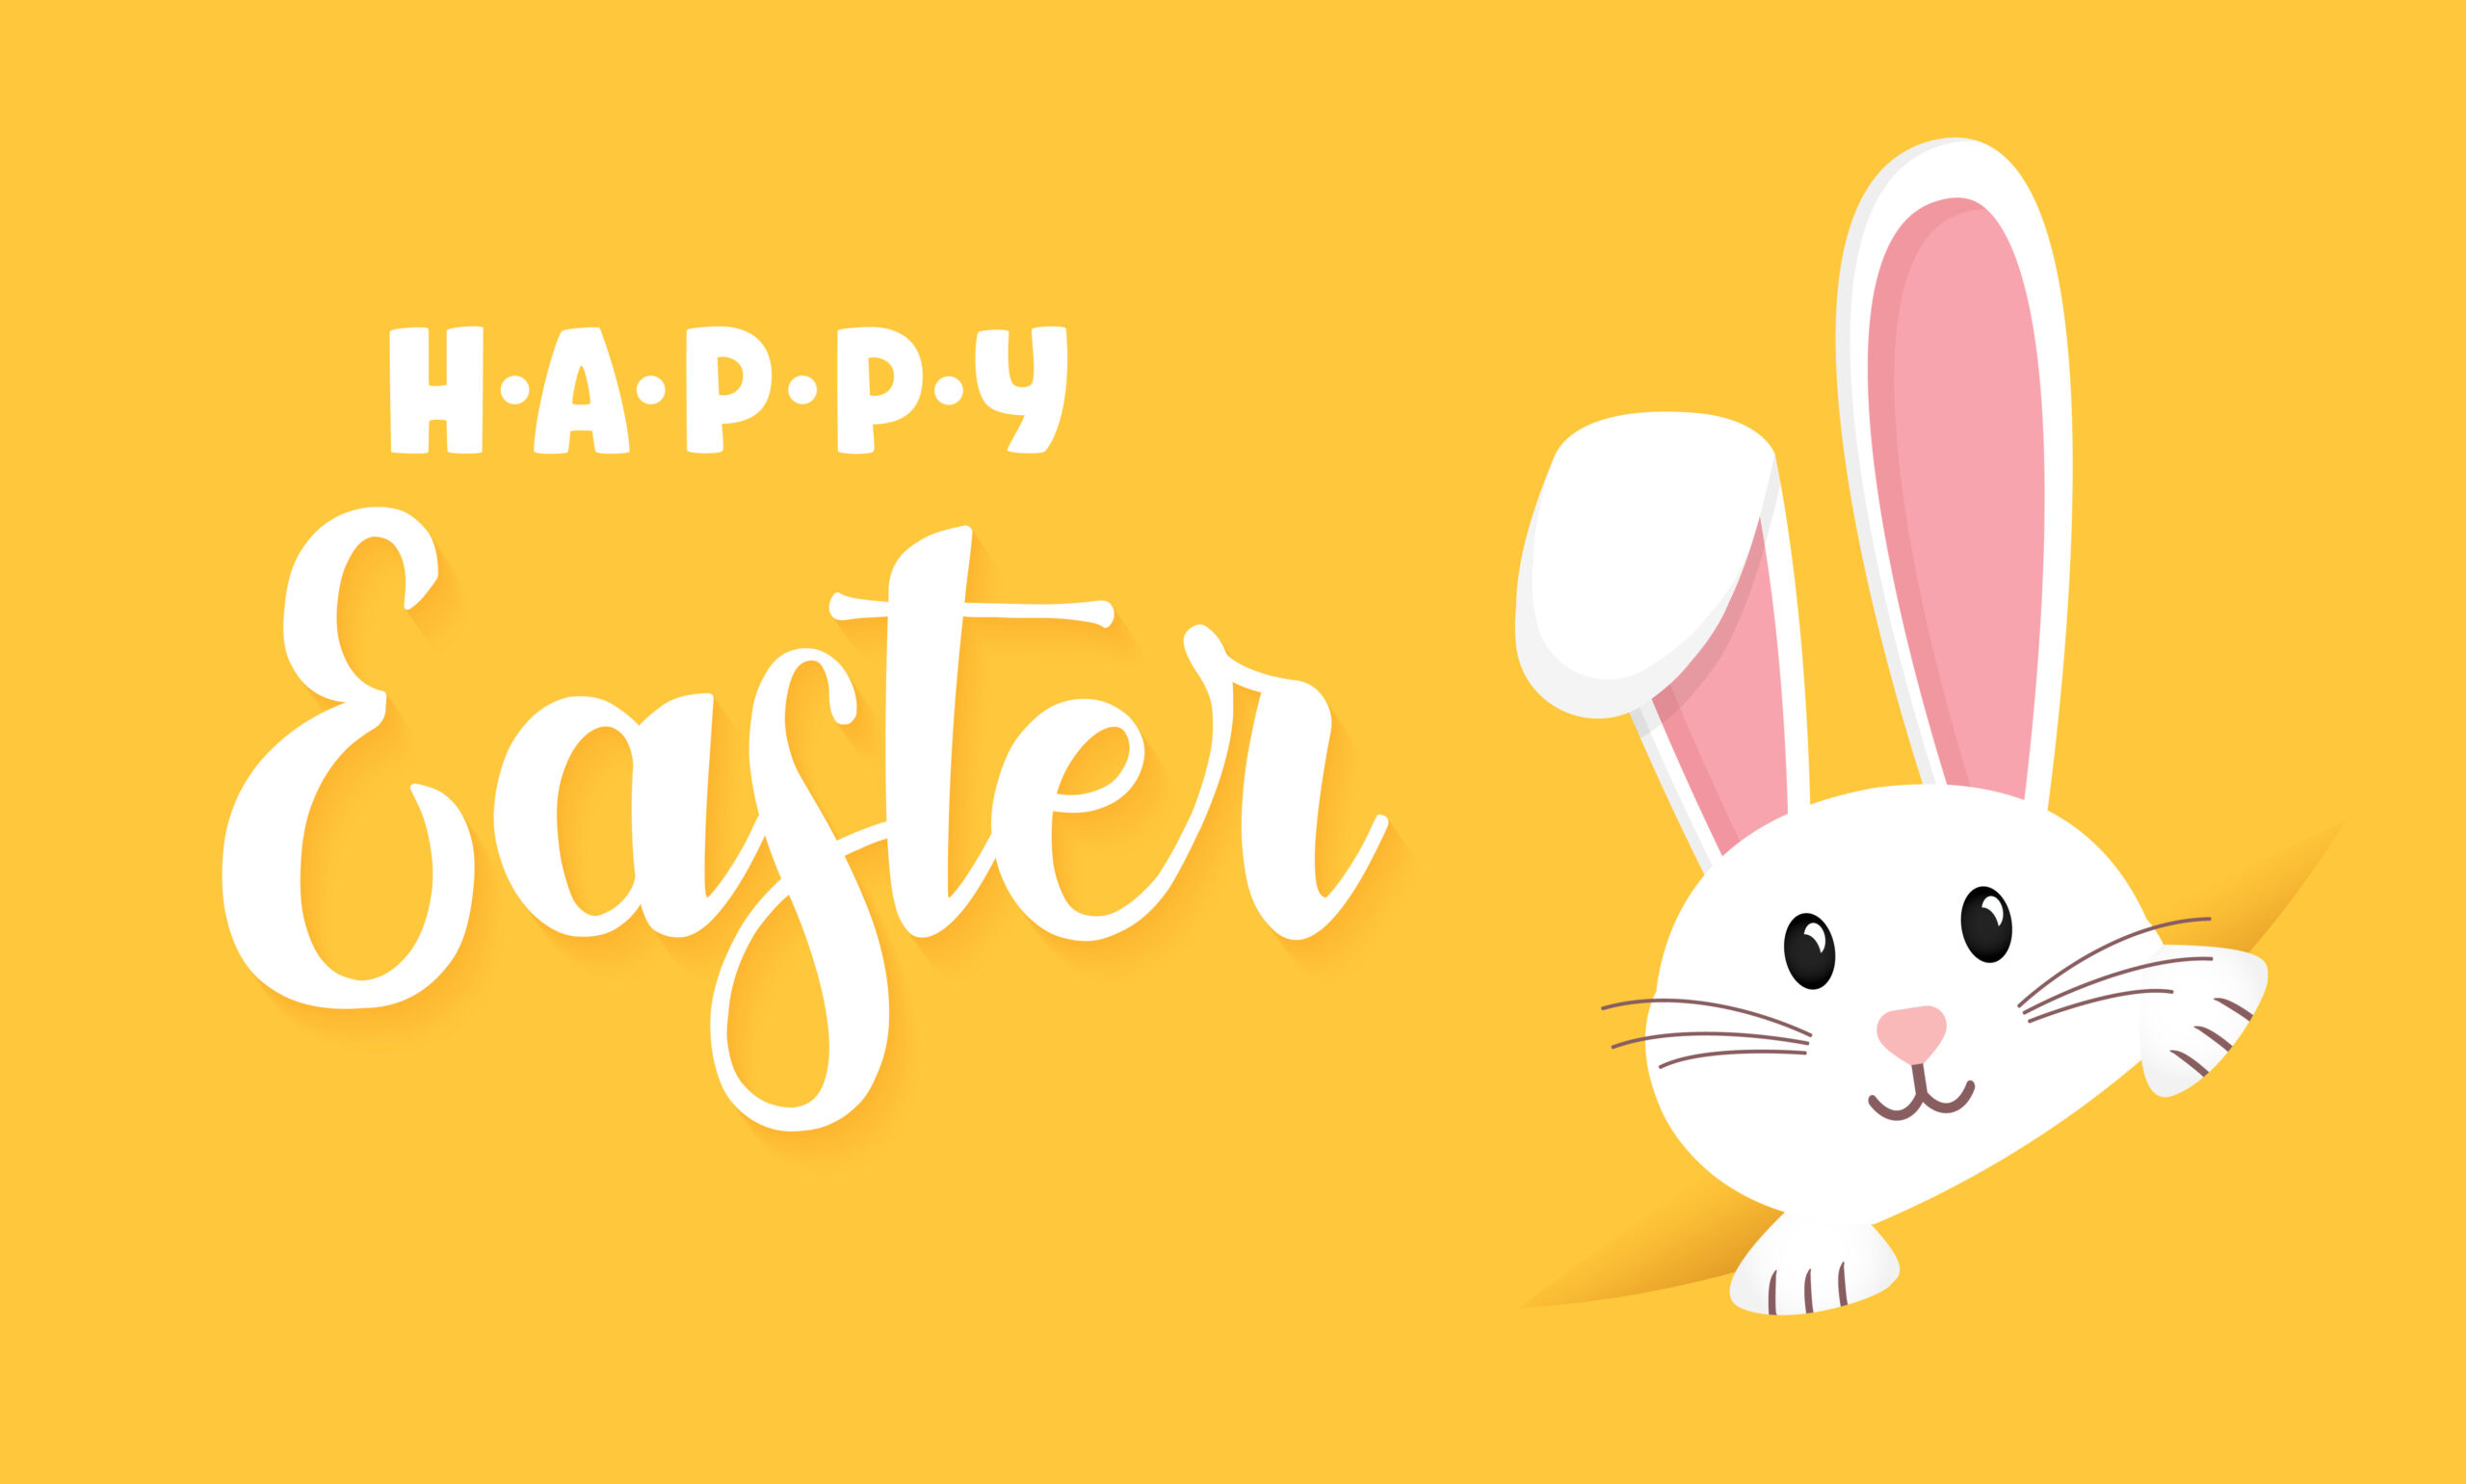 Happy easter with yellow background and a white bunny